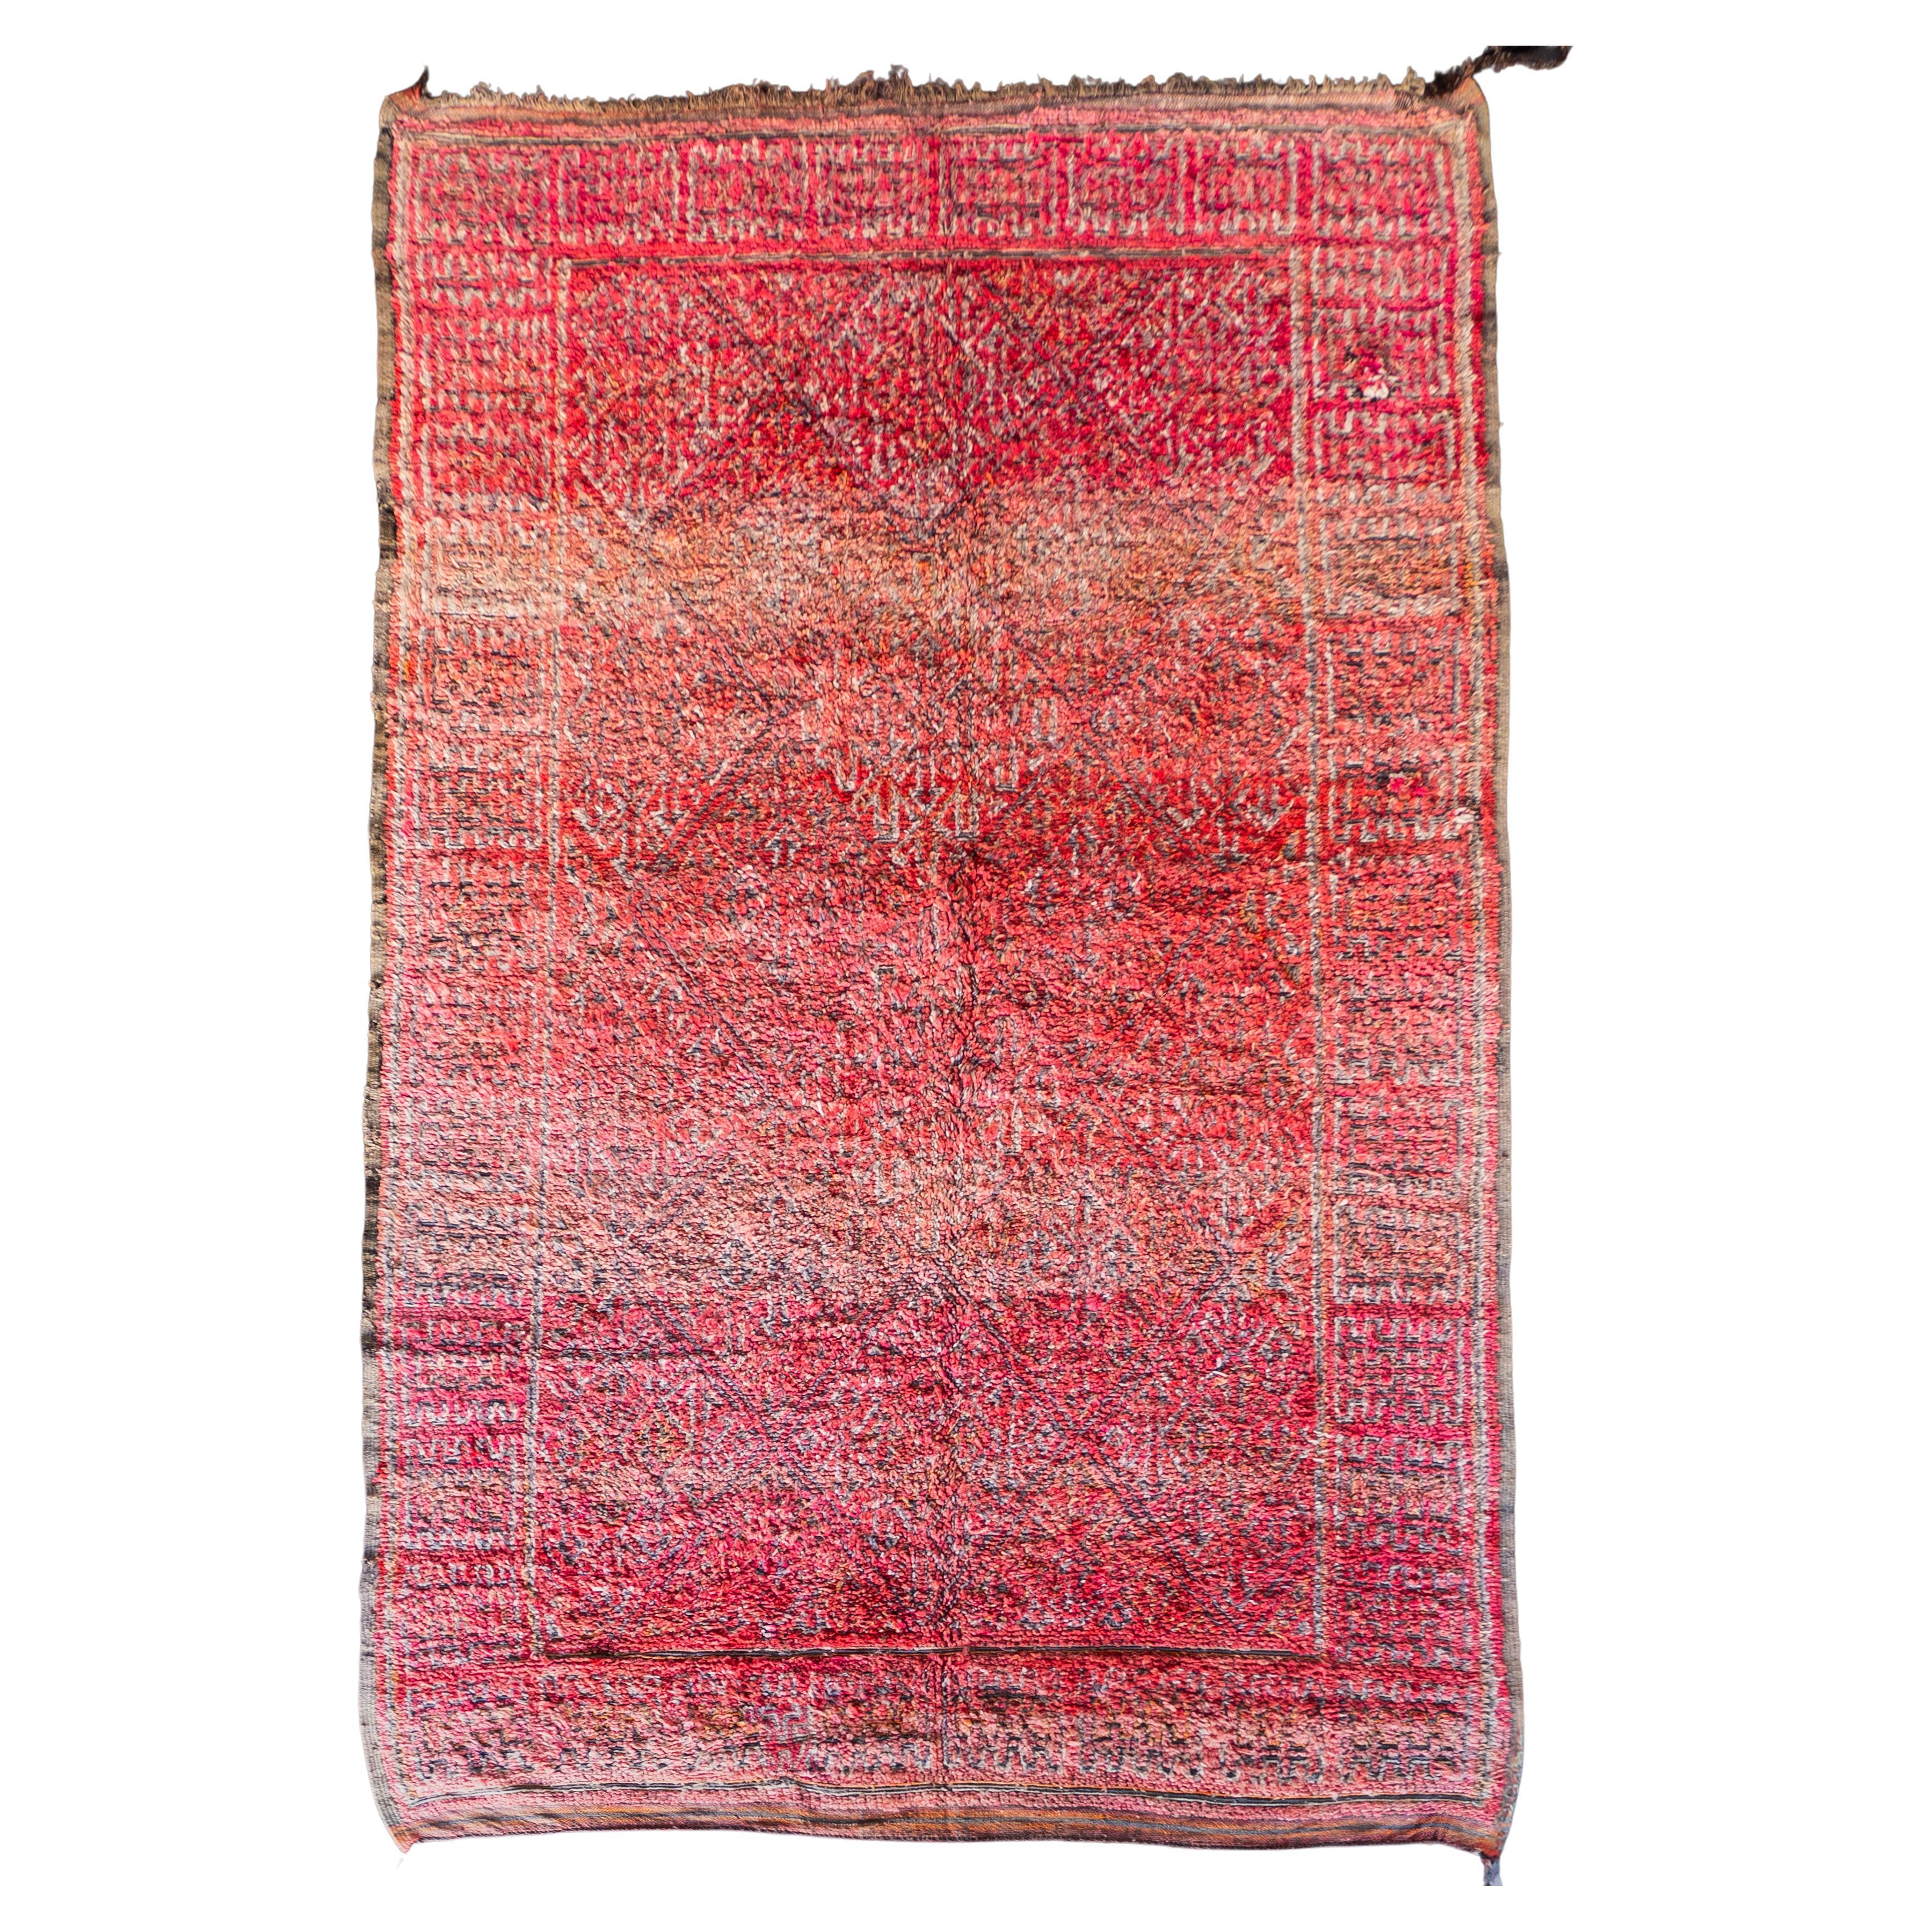 Pink Vintage Moroccan Berber Rug from 70s 100% wool 7x12.5 Ft 210x380 Cm For Sale